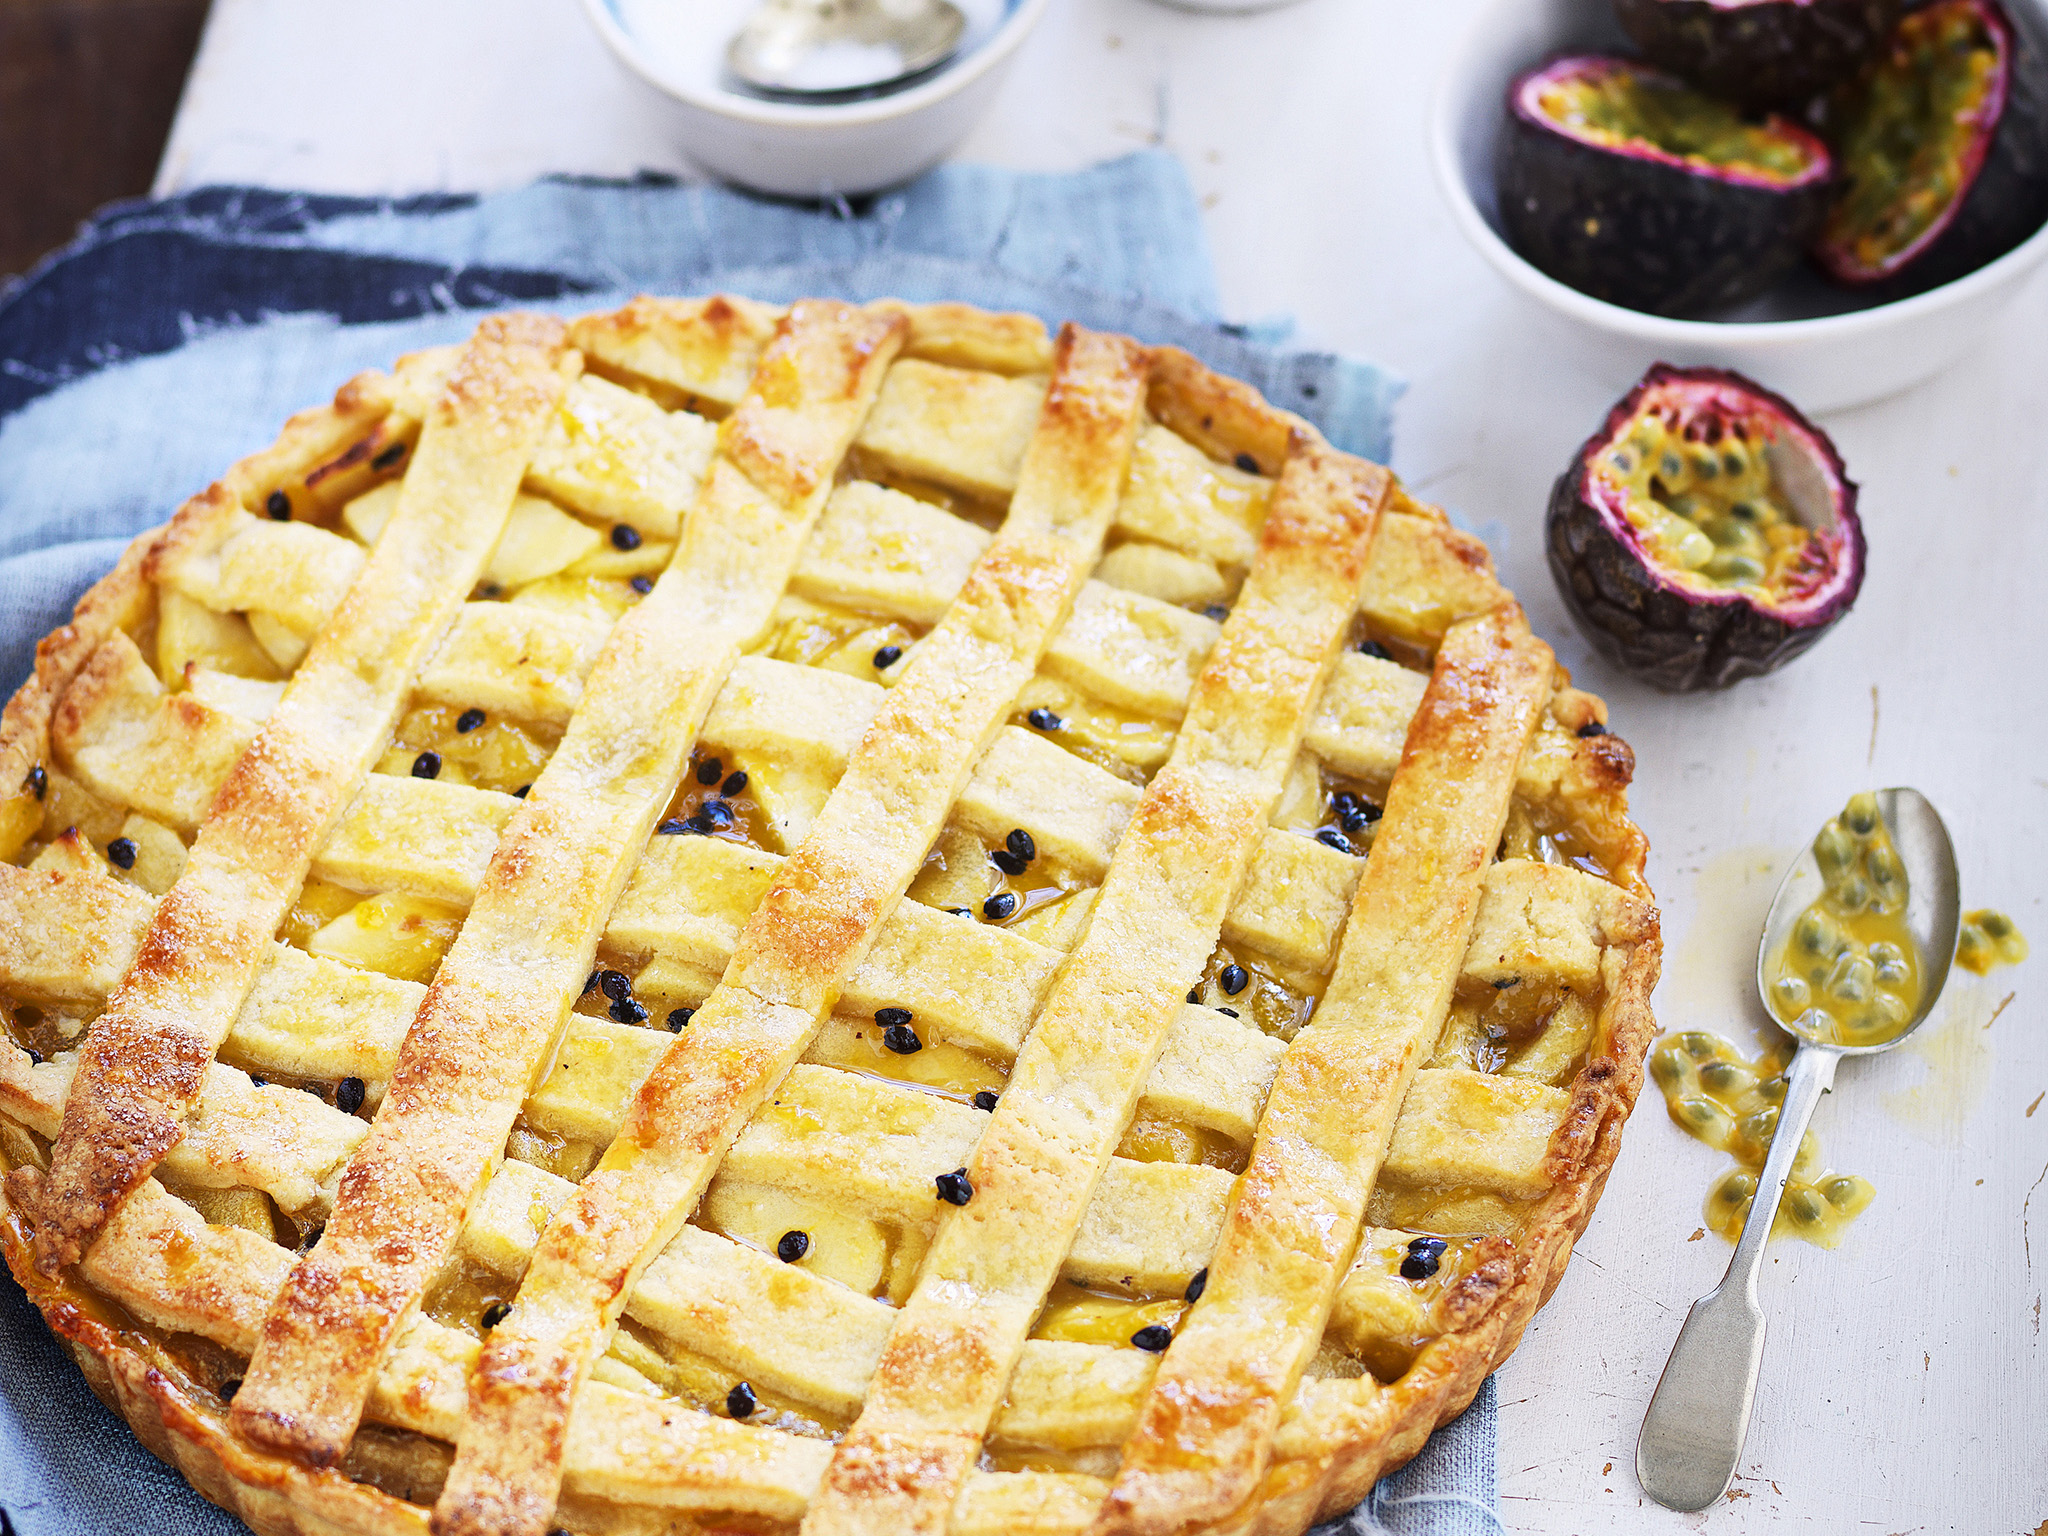 Apple and passionfruit pie